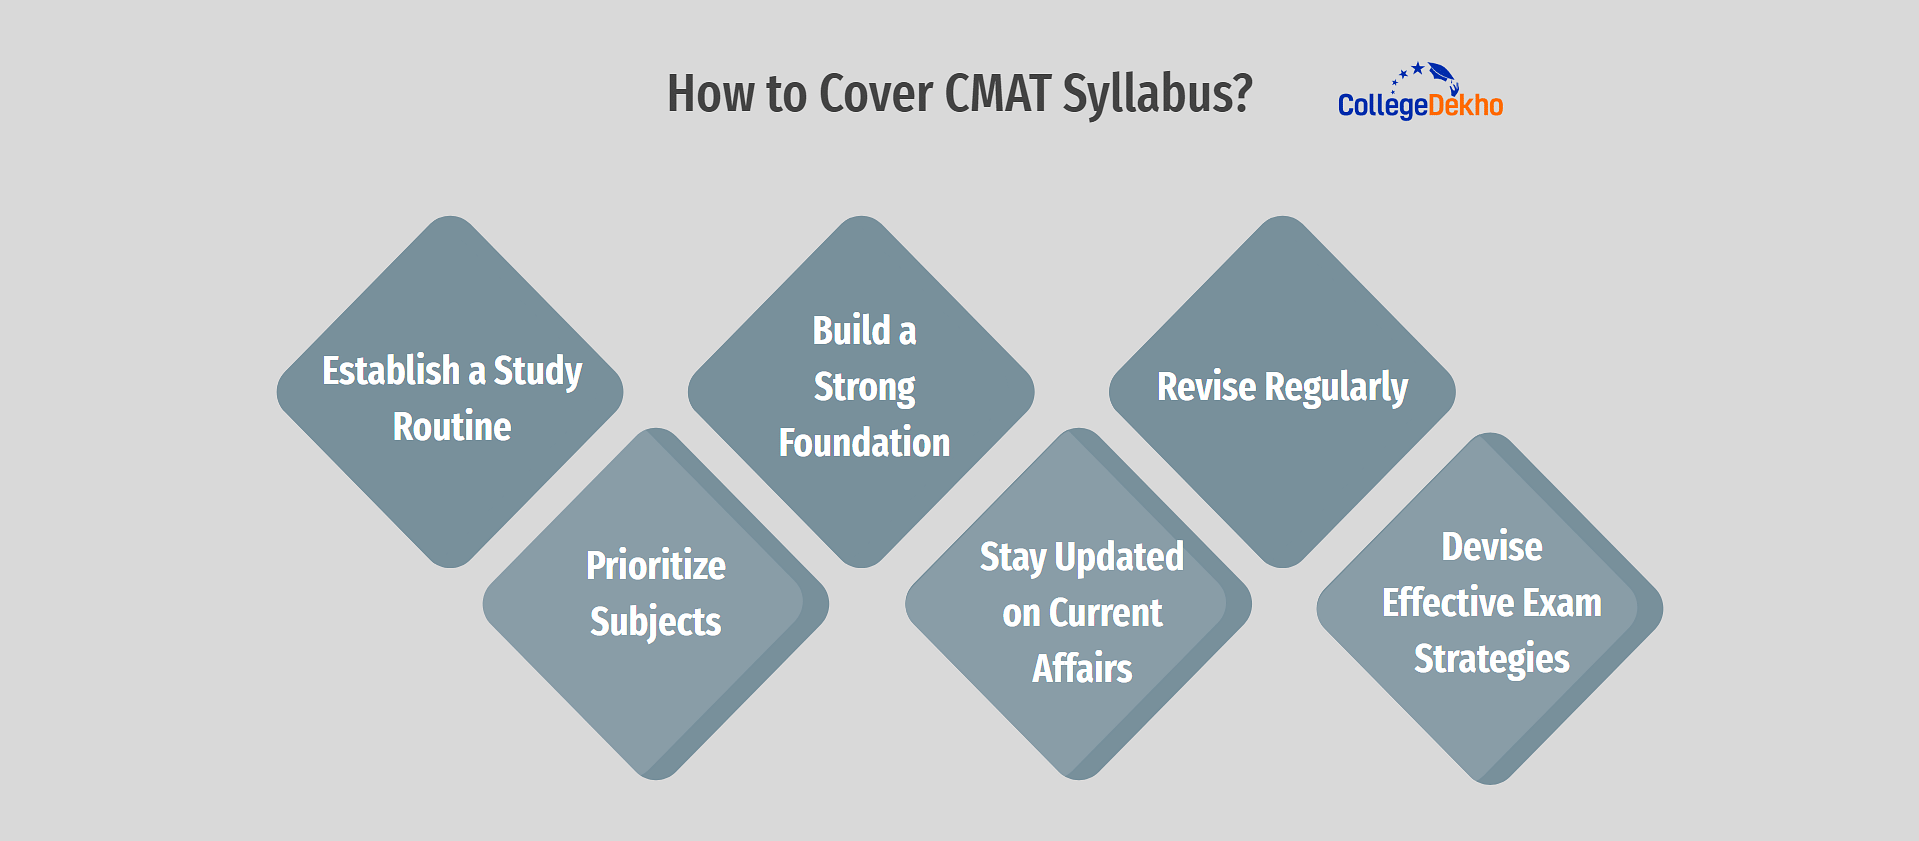 How to Cover CMAT Syllabus